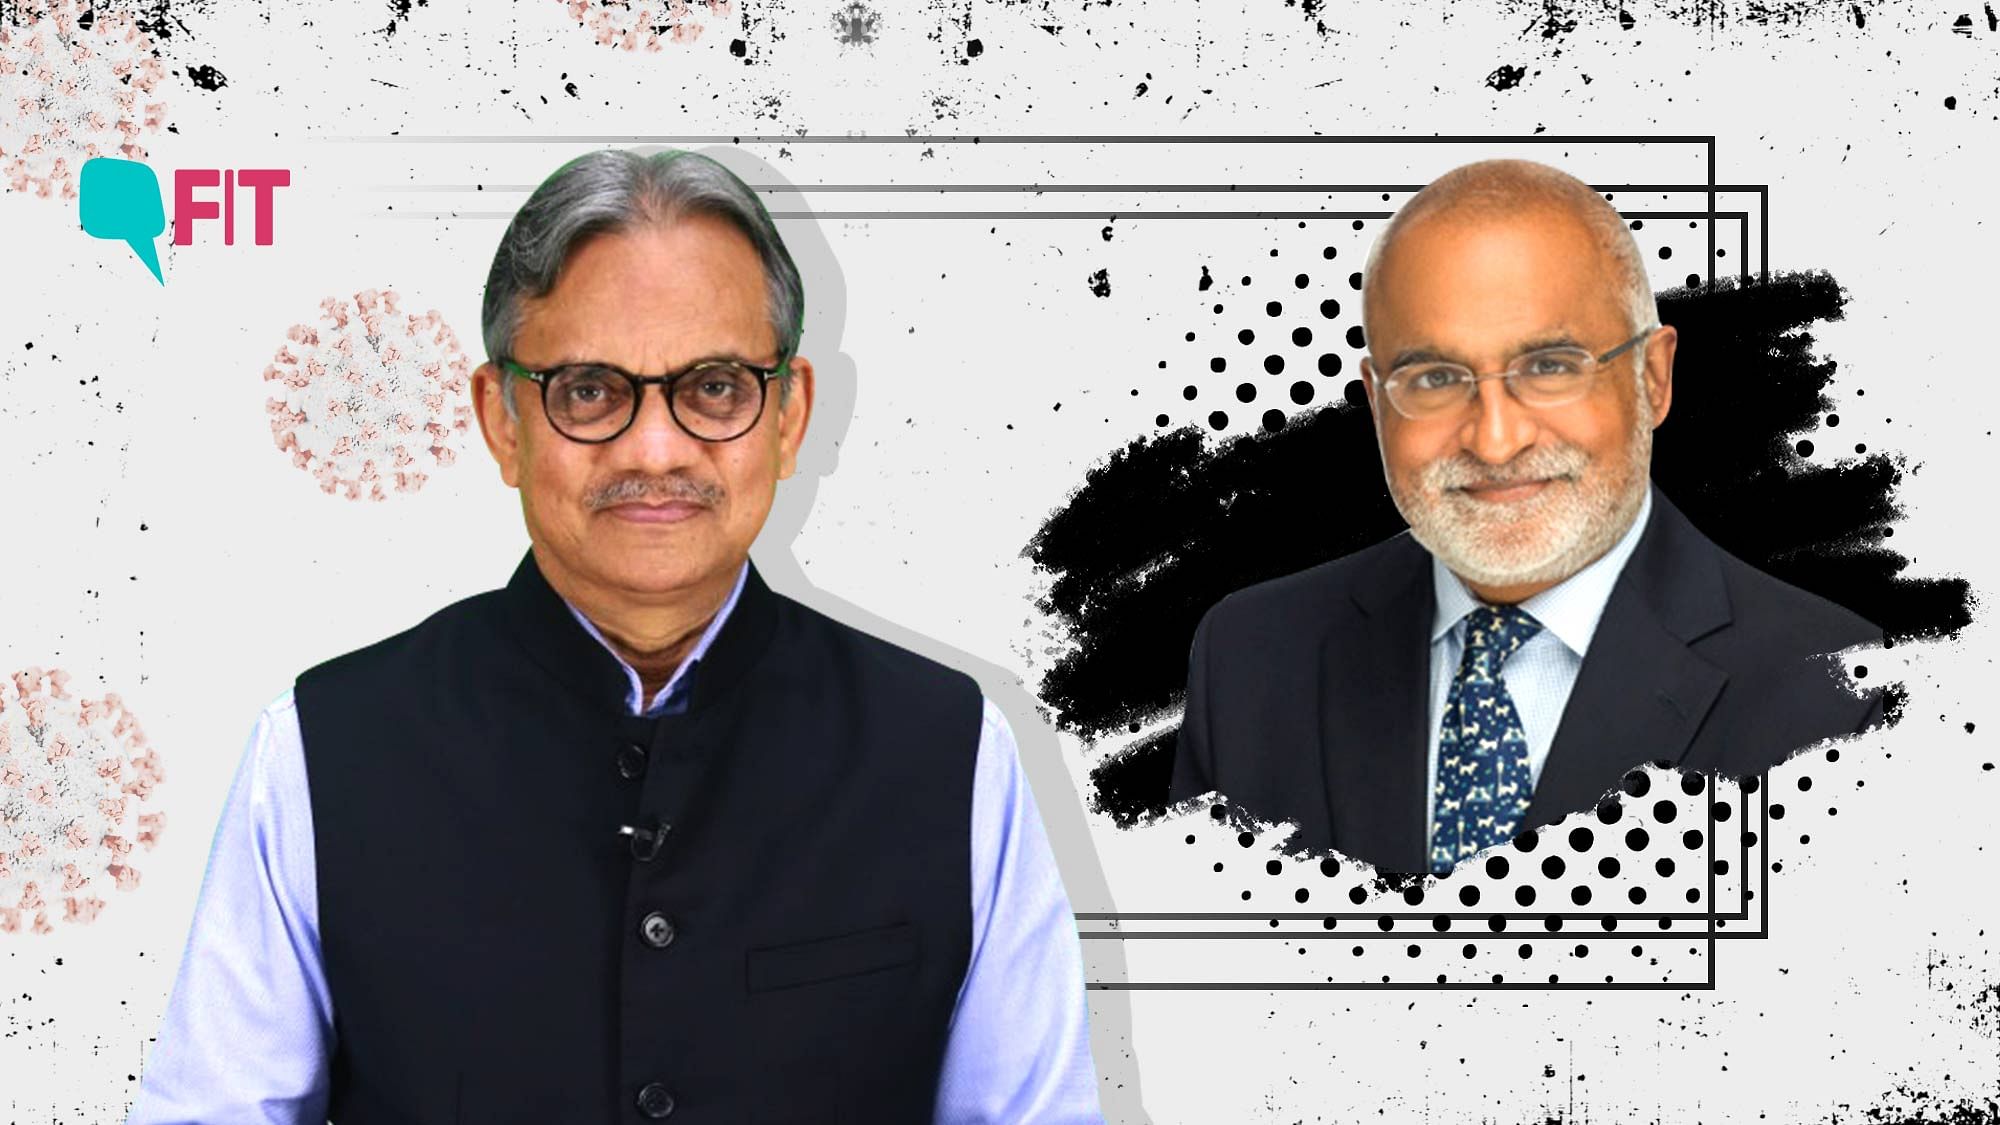 The Quint&apos;s Editorial Director Sanjay Pugalia sat down for a conversation with Dr Mehul Mehta, Chief Medical Officer, Albright Stonebridge Group.